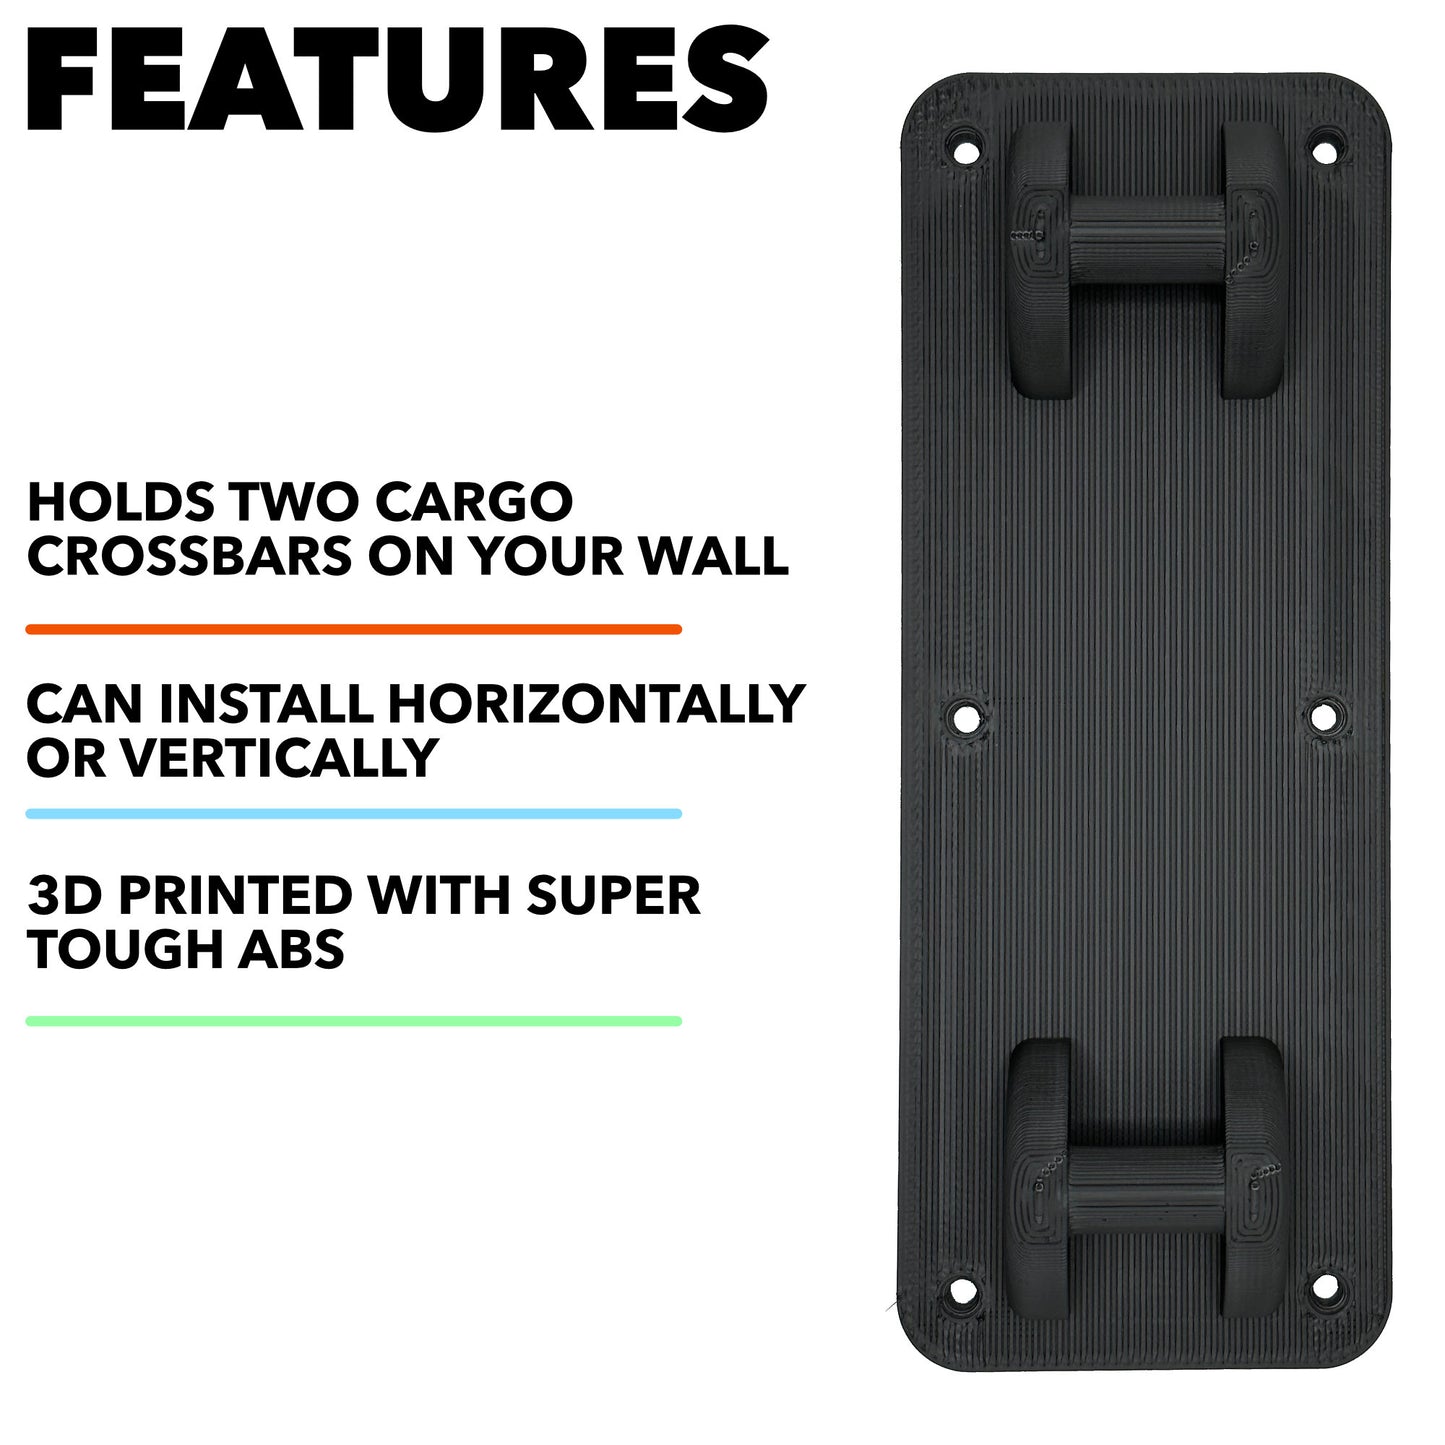 Cargo Crossbars Wall Mount for Rivian R1T/R1S